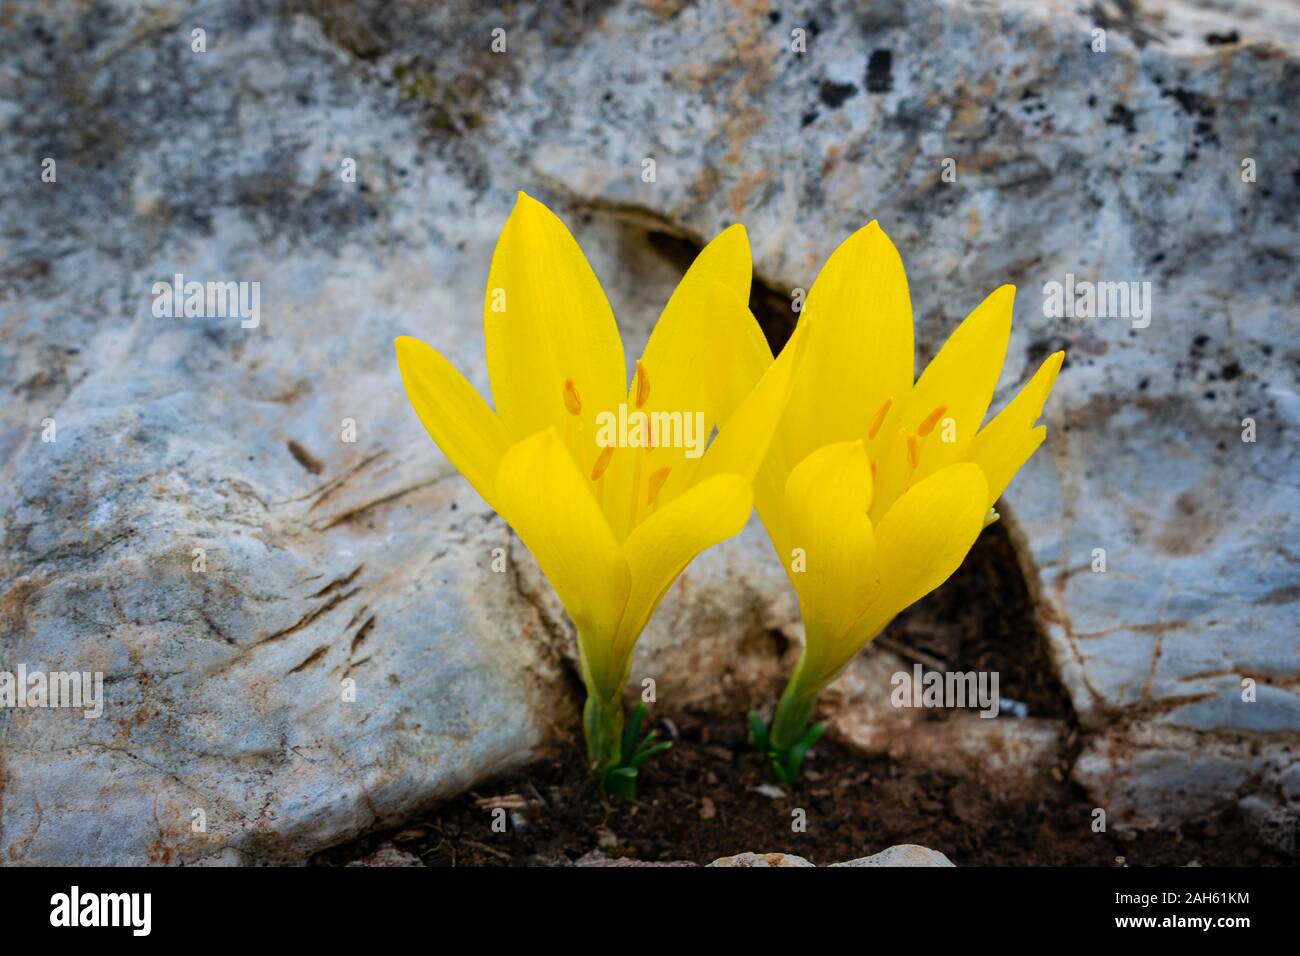 Sternbergia lutea (the autumn daffodil, lily of the field, yellow autumn crocus) flowers Stock Photo